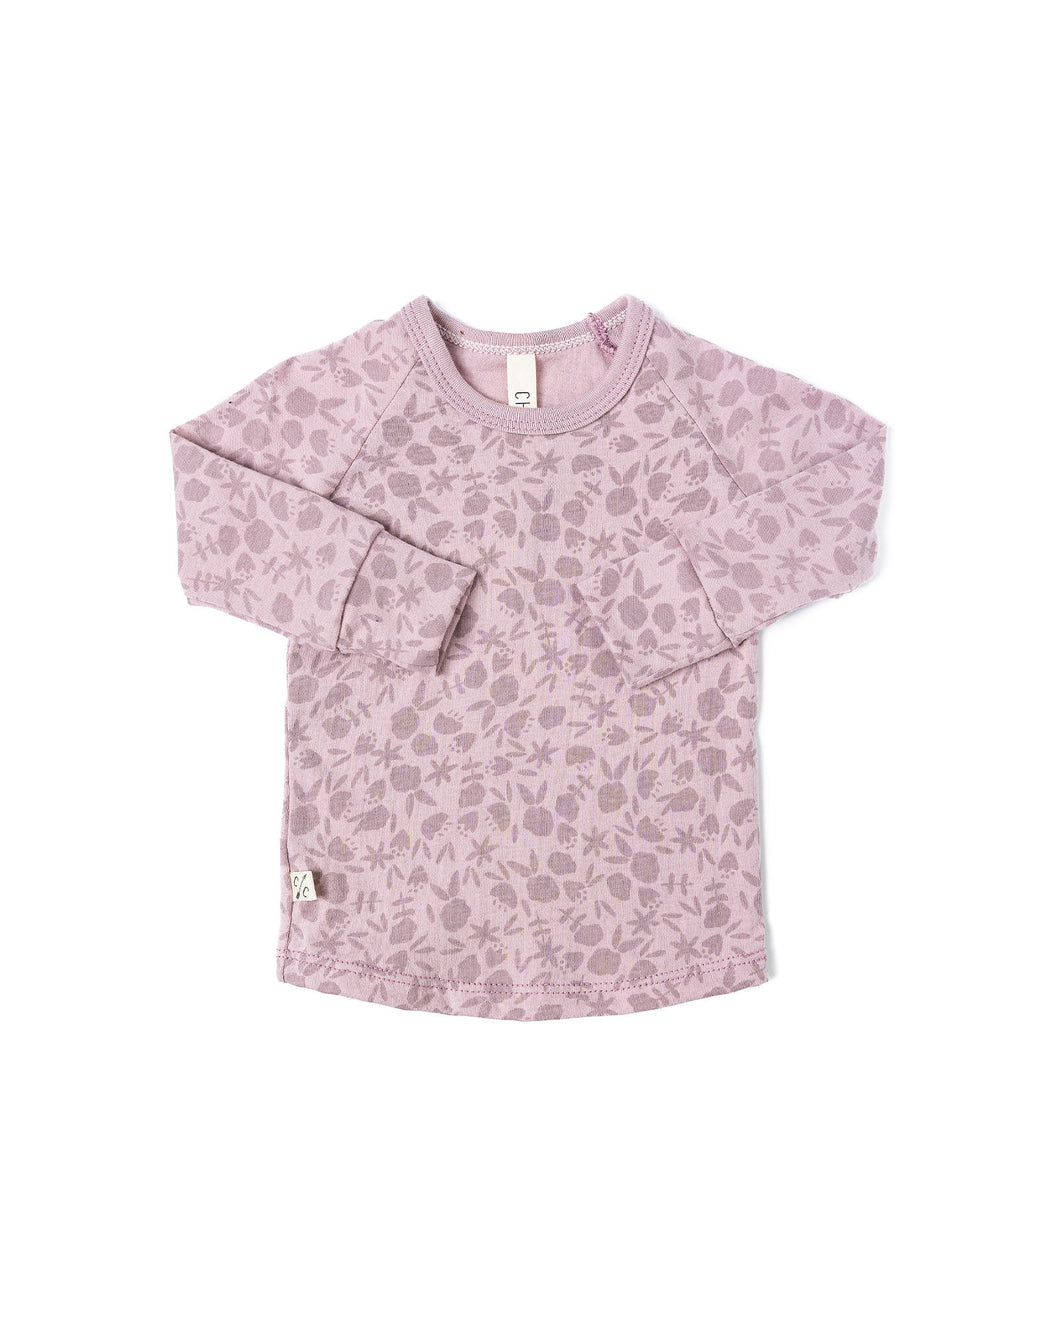 jersey long sleeve tee - ditsy floral on lilac